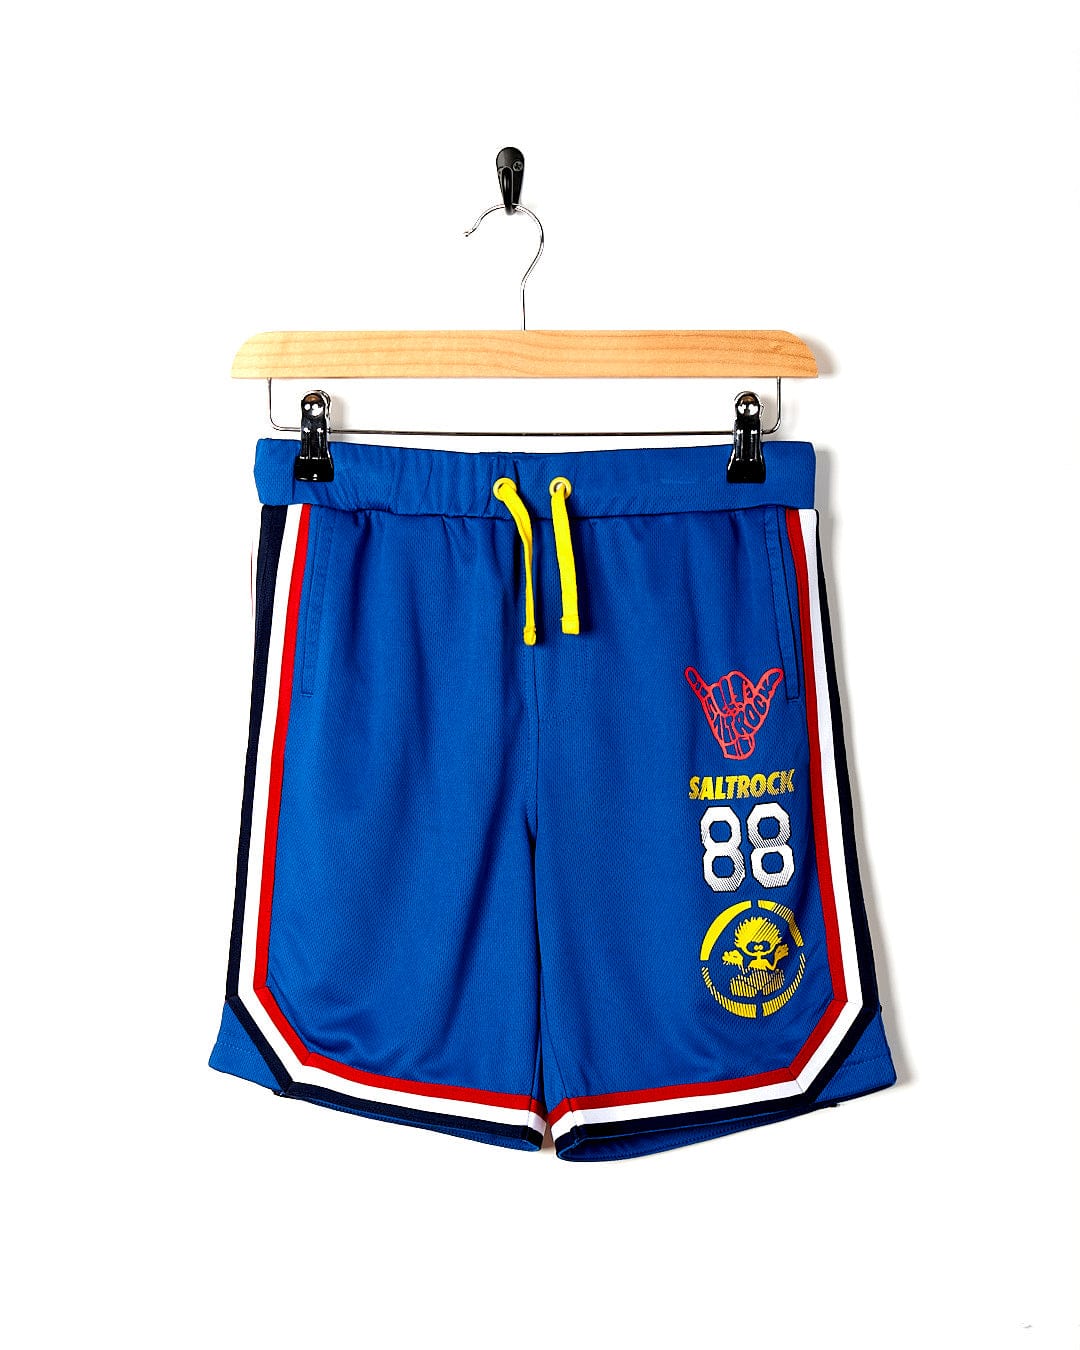 A pair of Saltrock blue shorts with the number 88 on them.